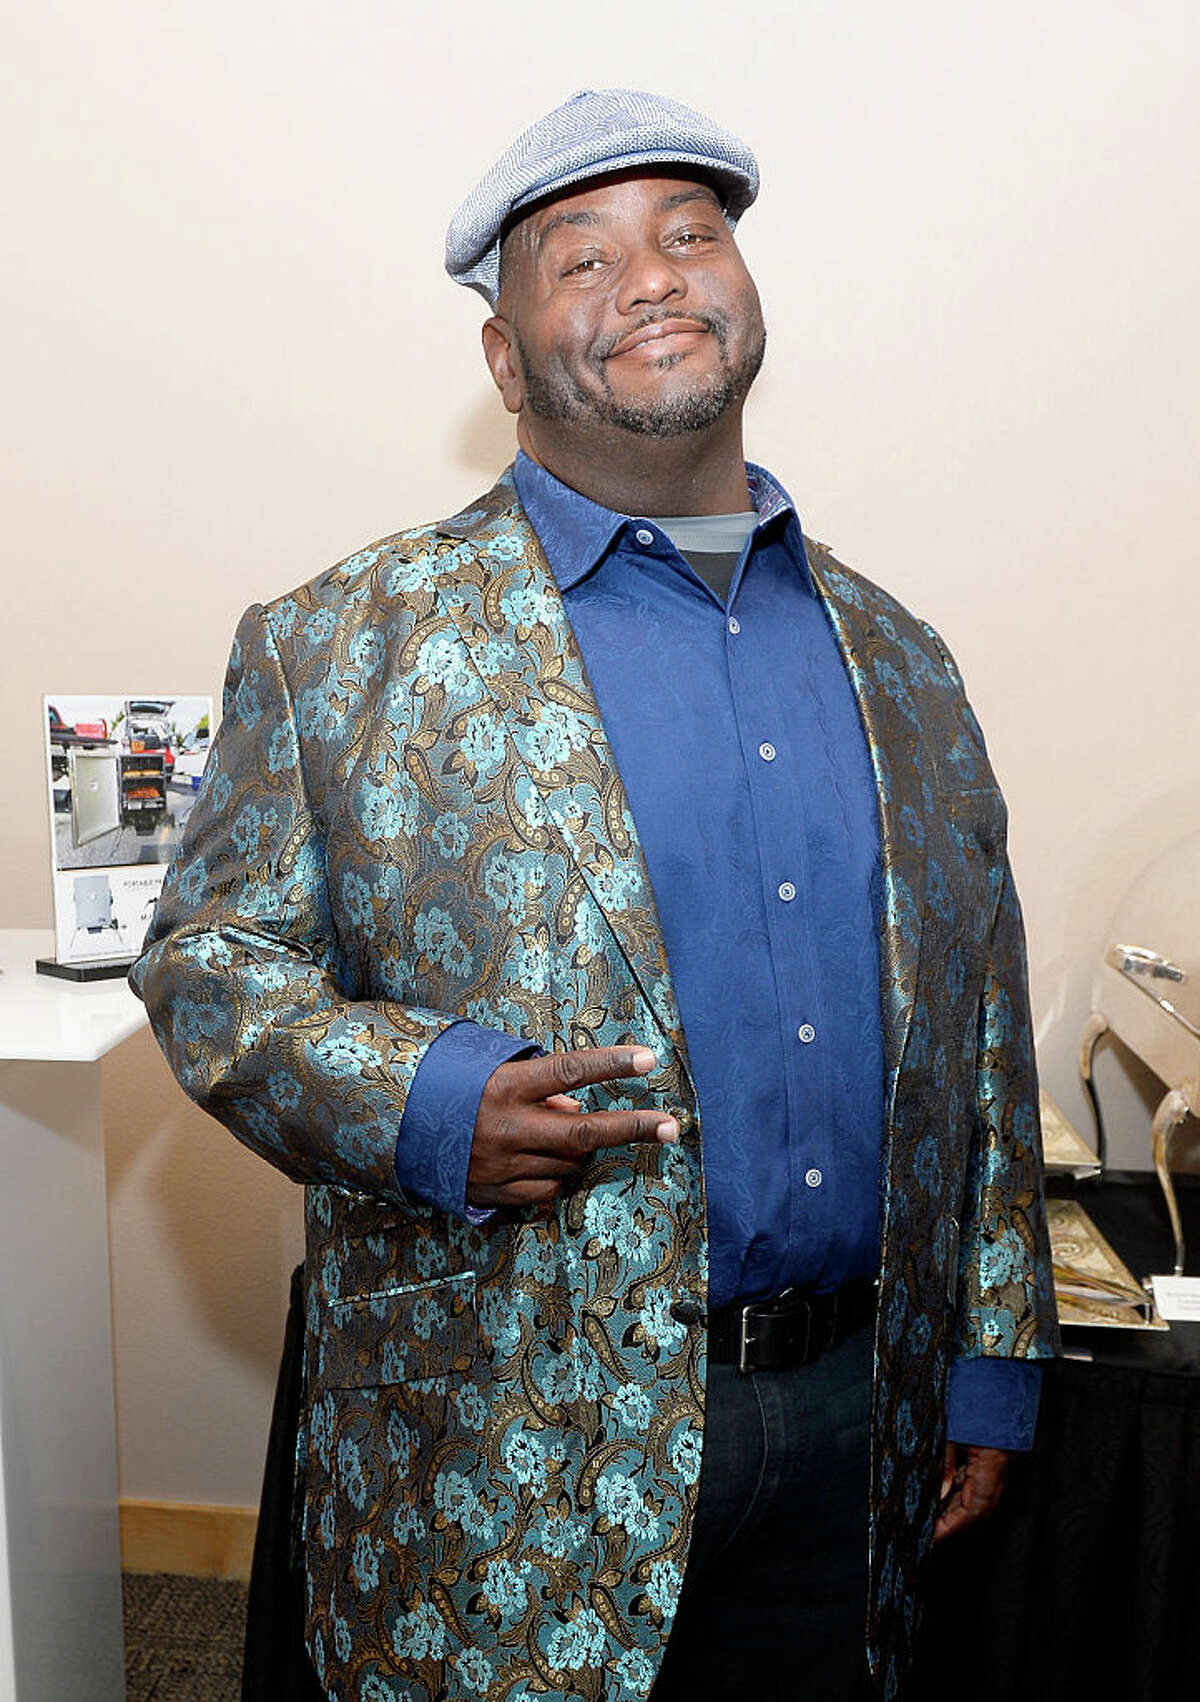 After going public with his weight loss surgery in February, comedian Lavell Crawford presented at the 2016 Neighborhood Awards over the weekend seemingly a new man physically.